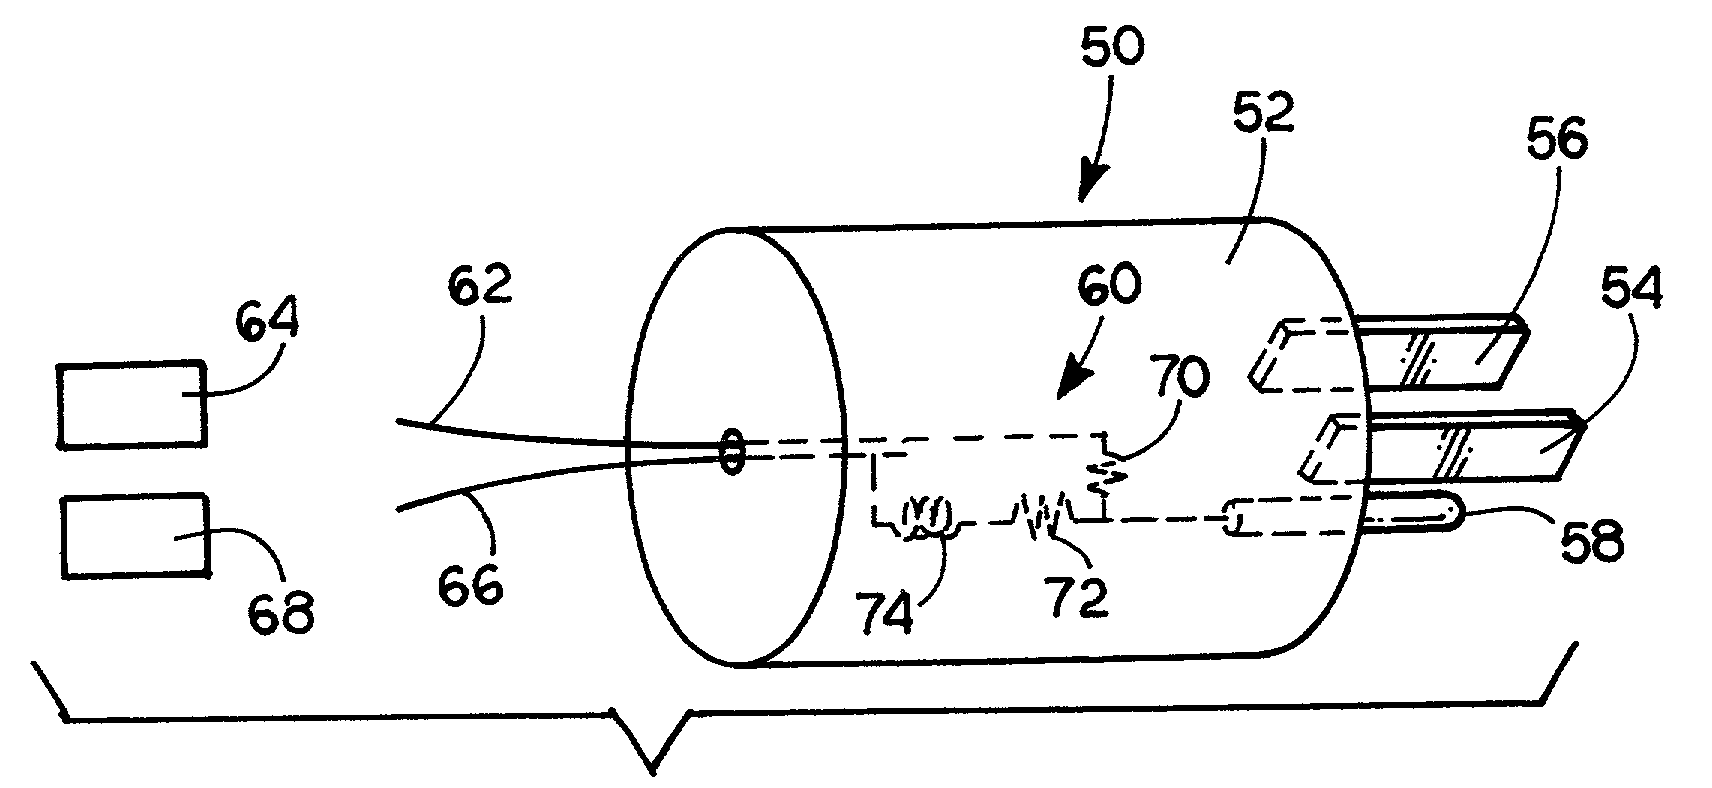 Plug and circuitry for grounding an element